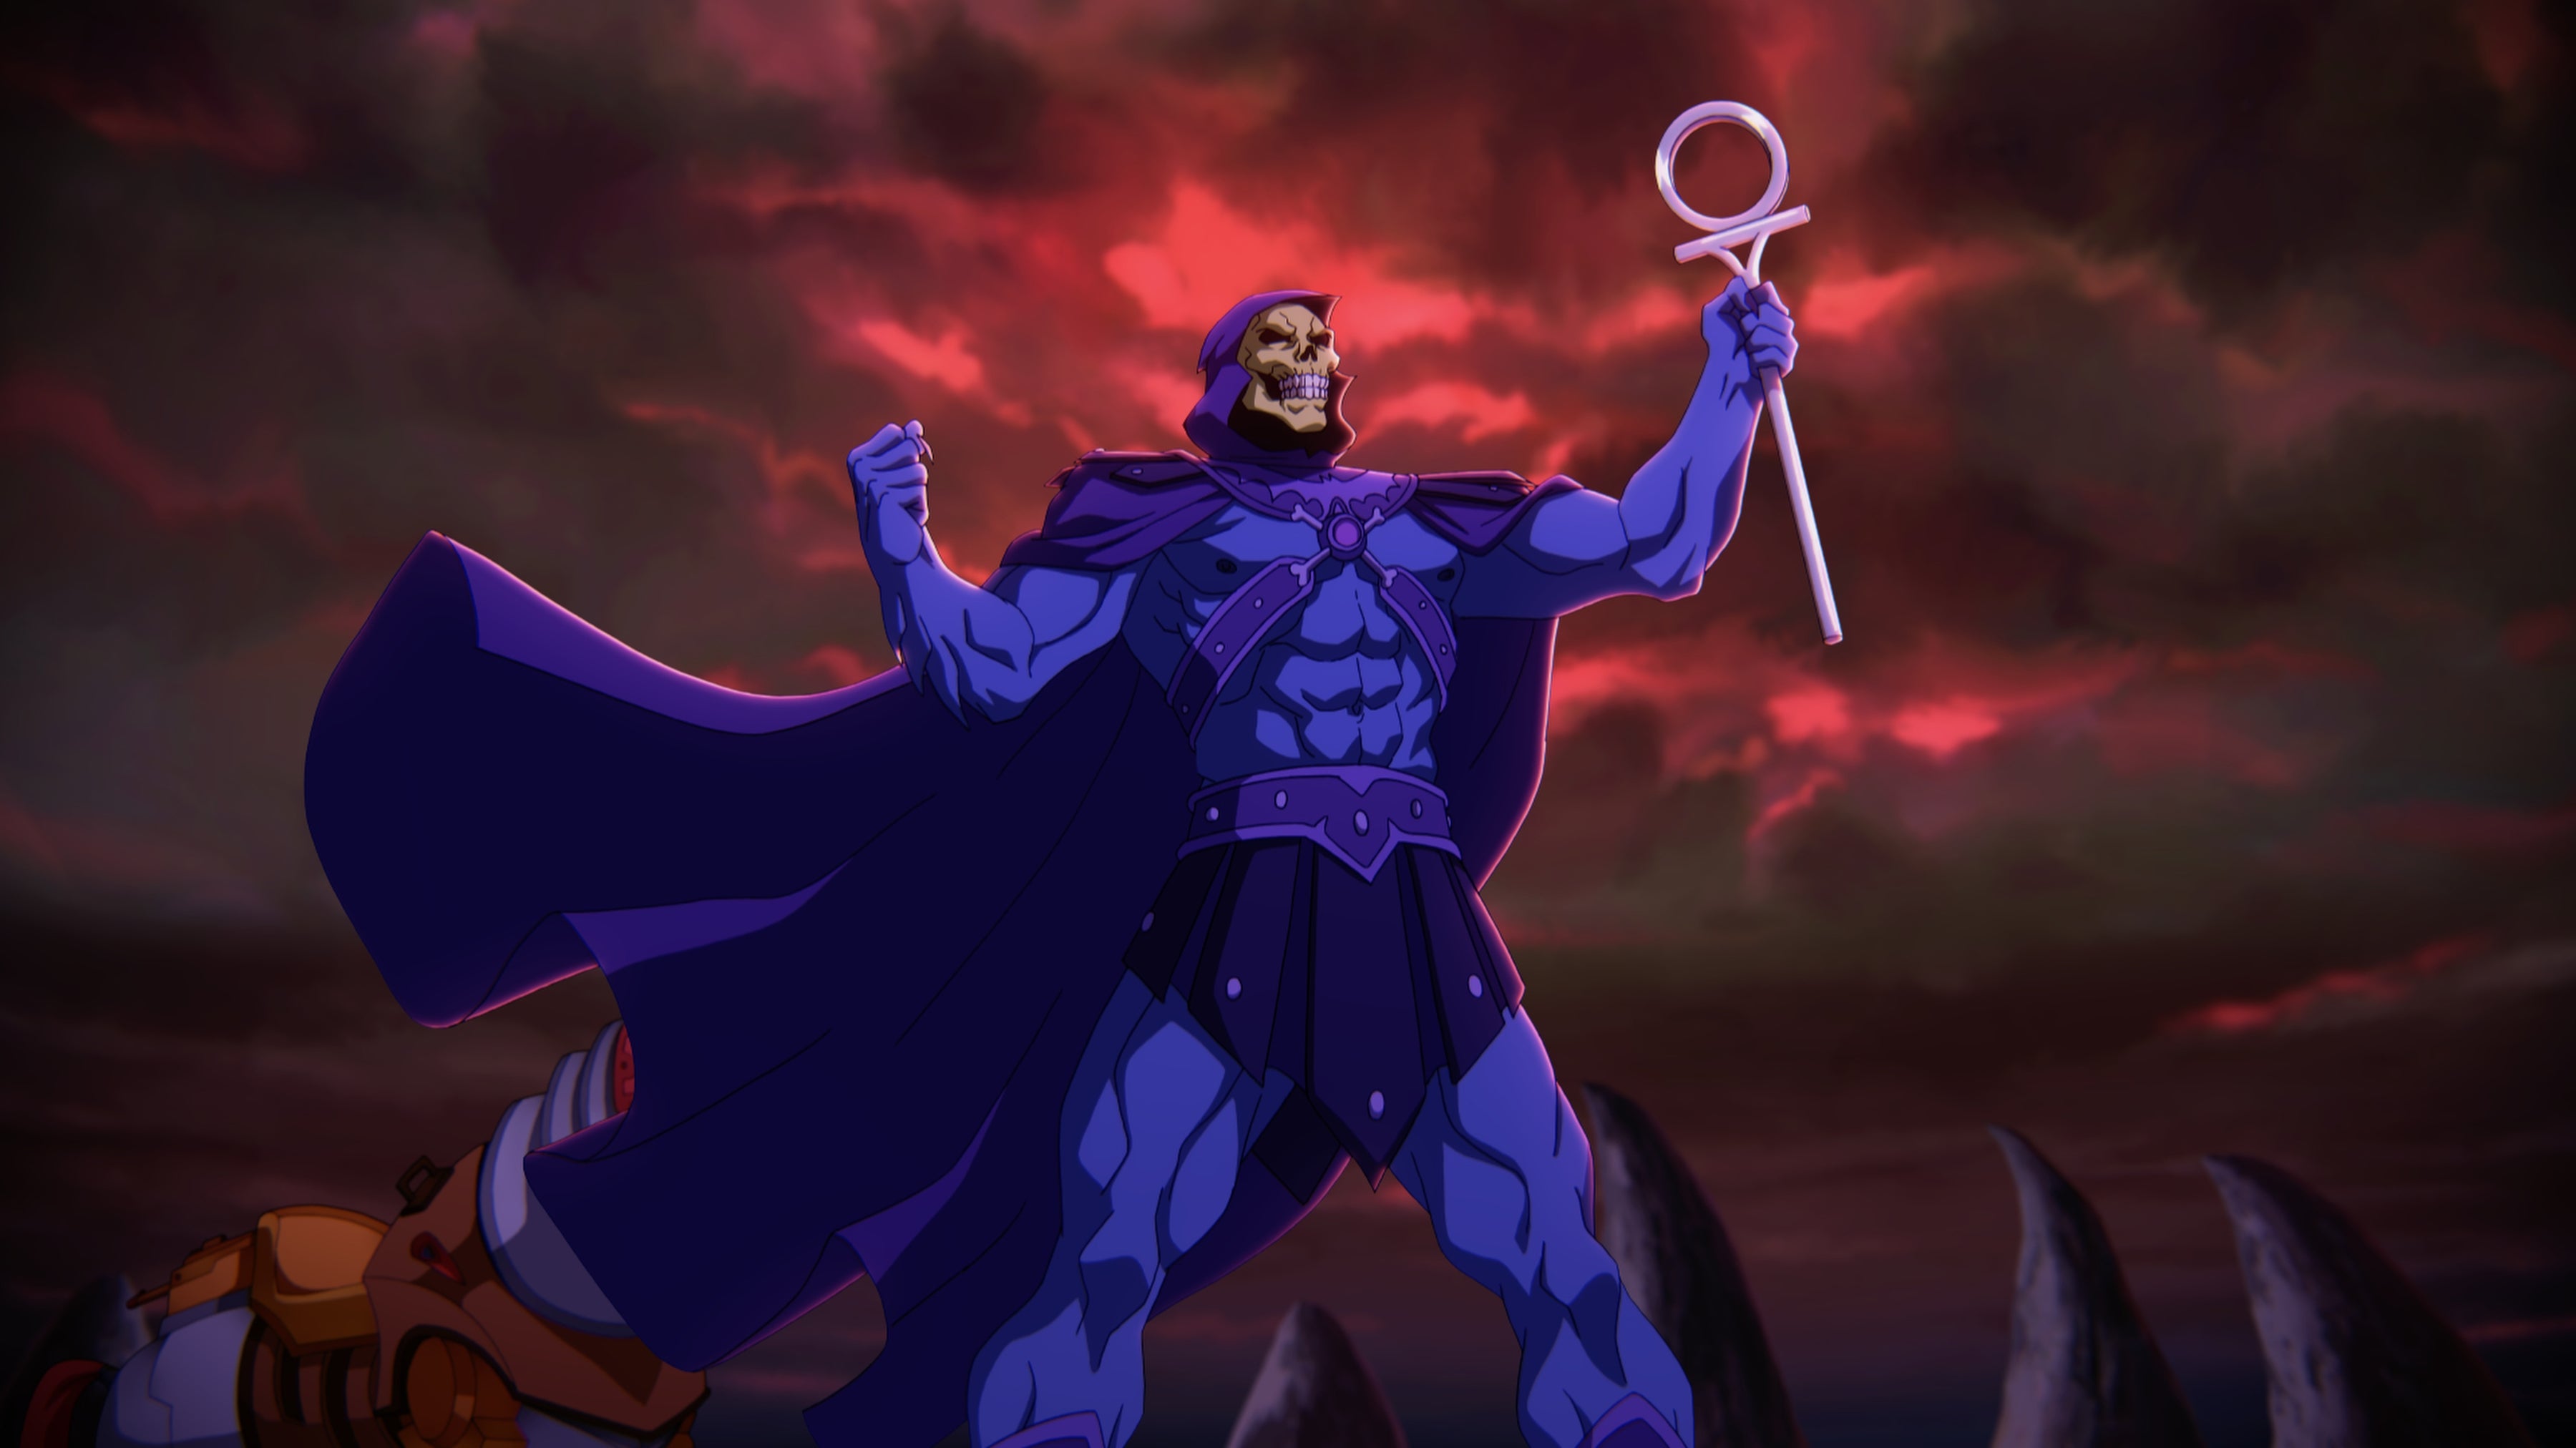 Masters Of The Universe Revelation Netflix Wallpapers